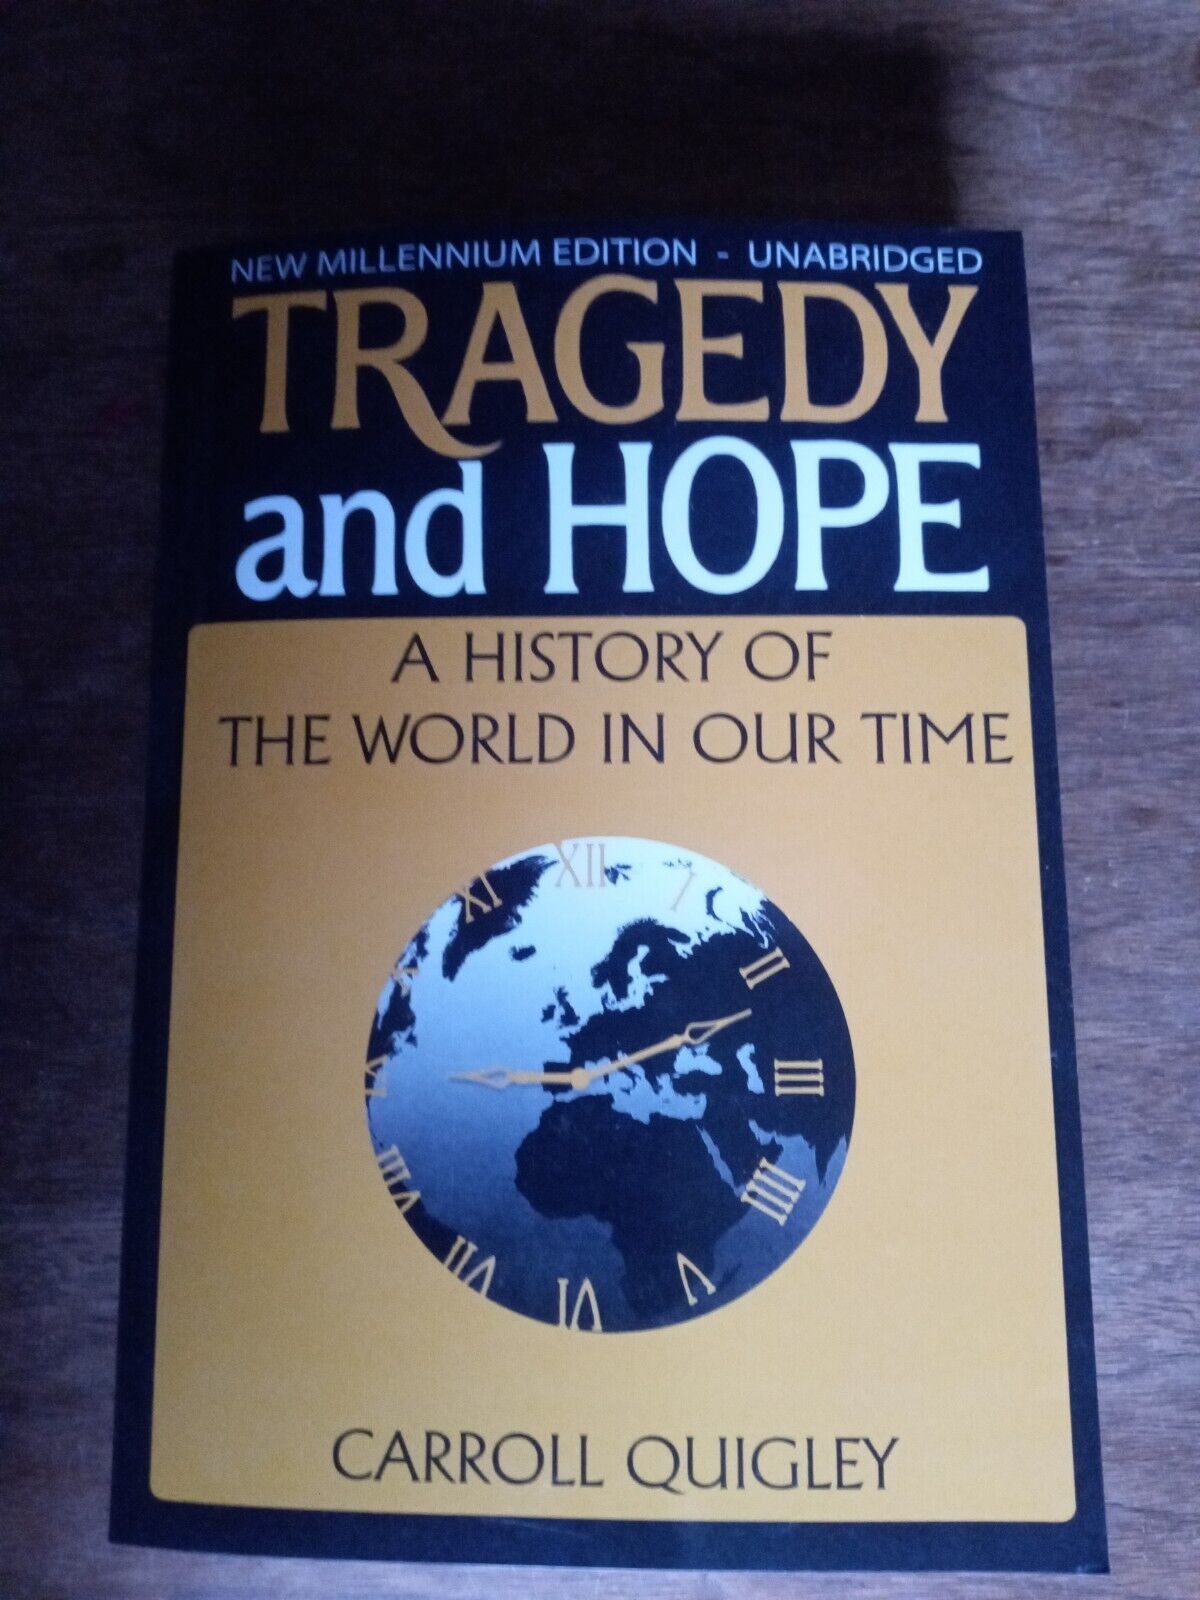 Tragedy and Hope by Carroll Quigley (2014, Trade Paperback)